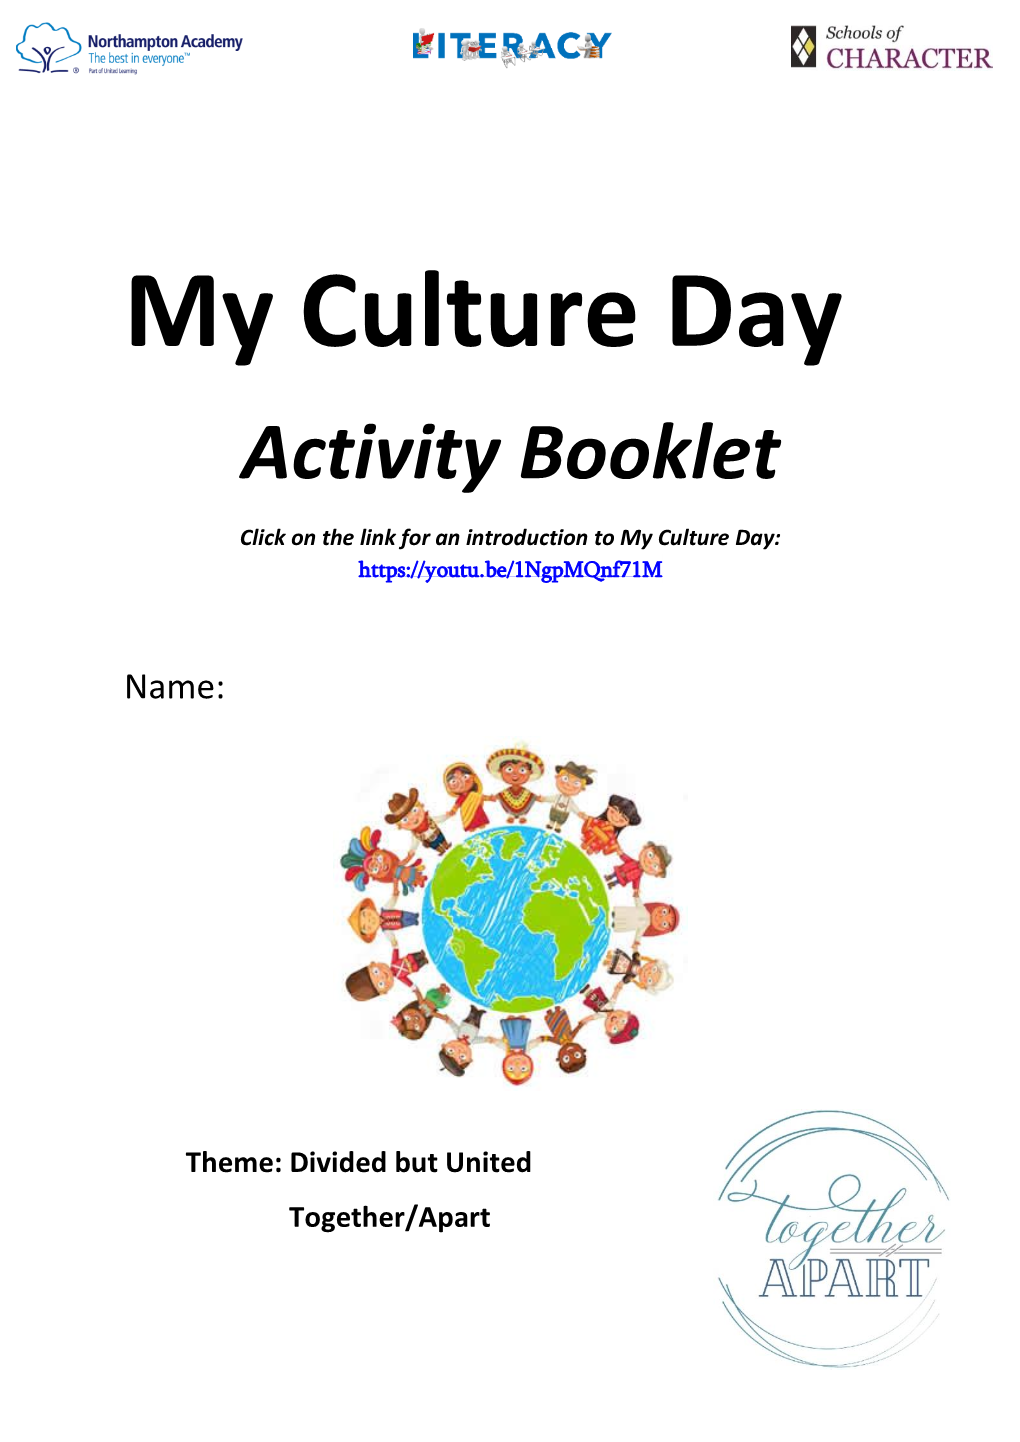 My Culture Day Activity Booklet